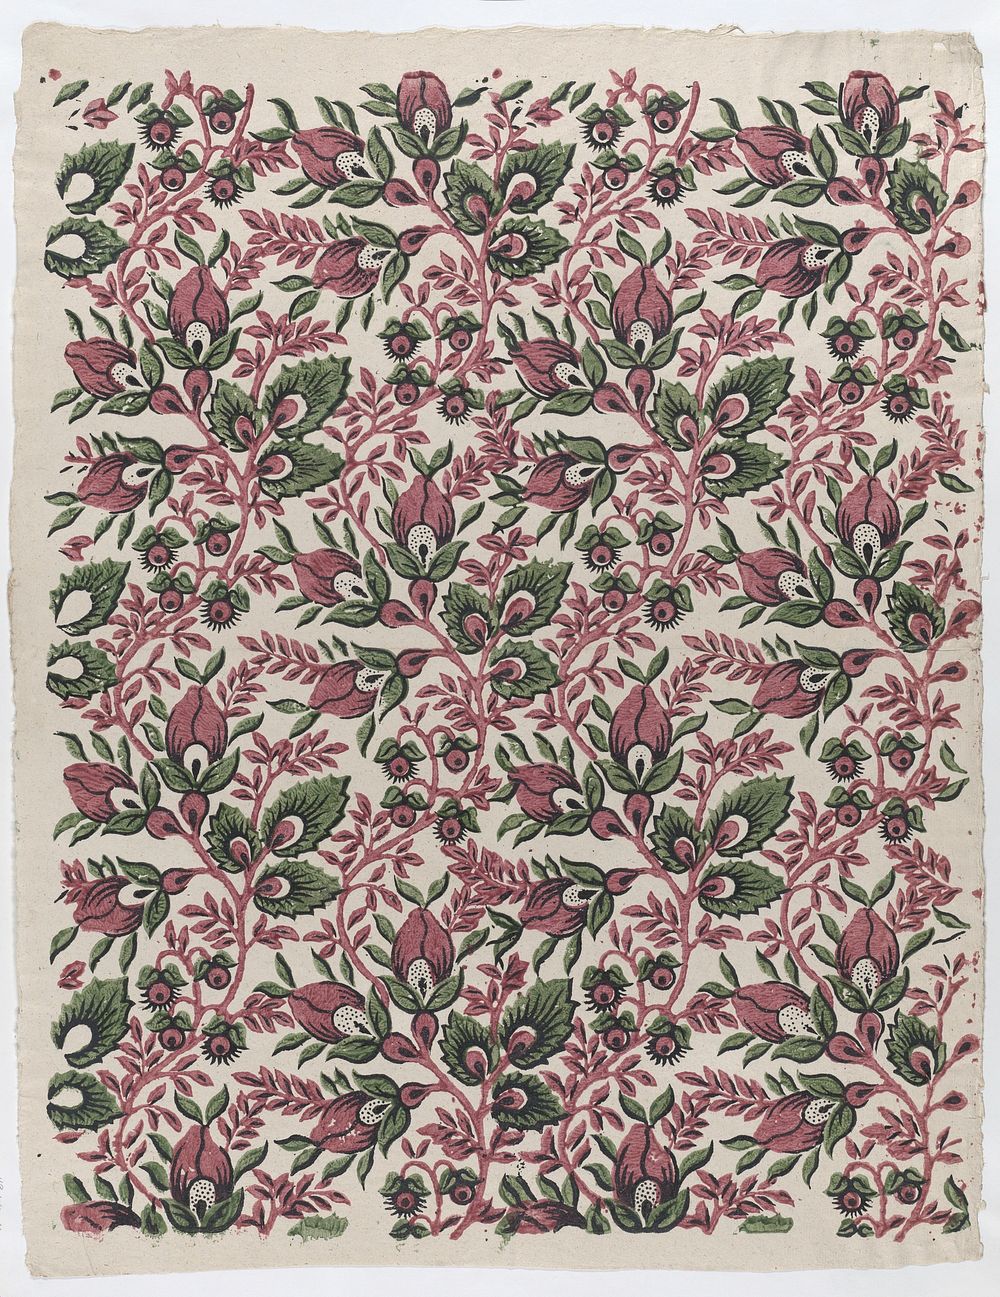 Sheet with overall floral and vine pattern